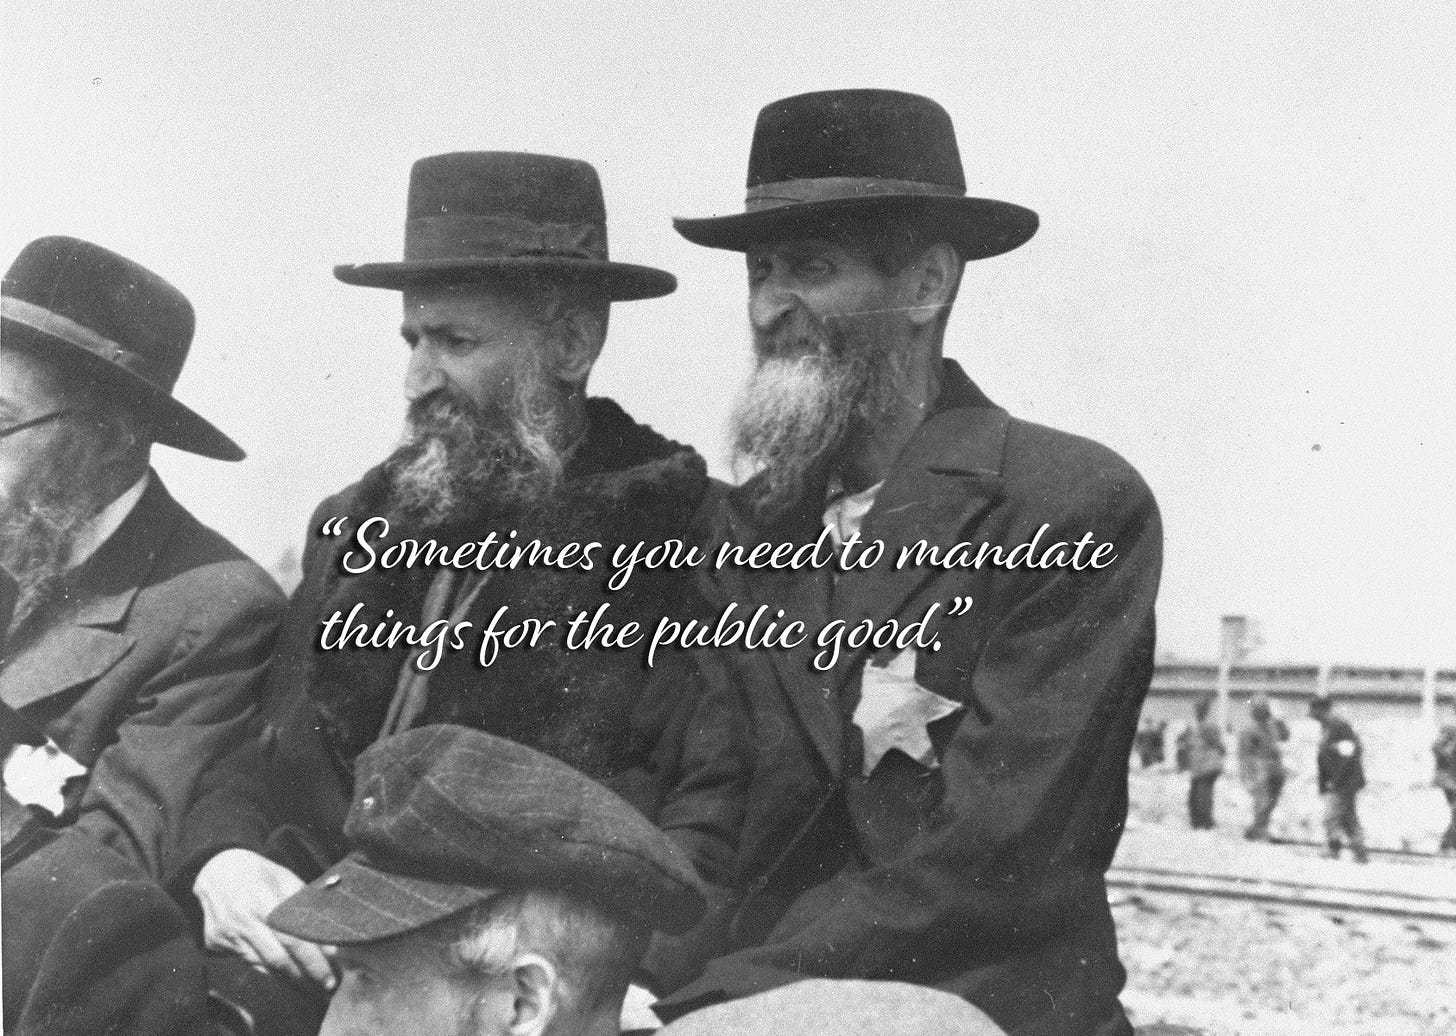 "Sometimes you meed to mandate things for the public good."